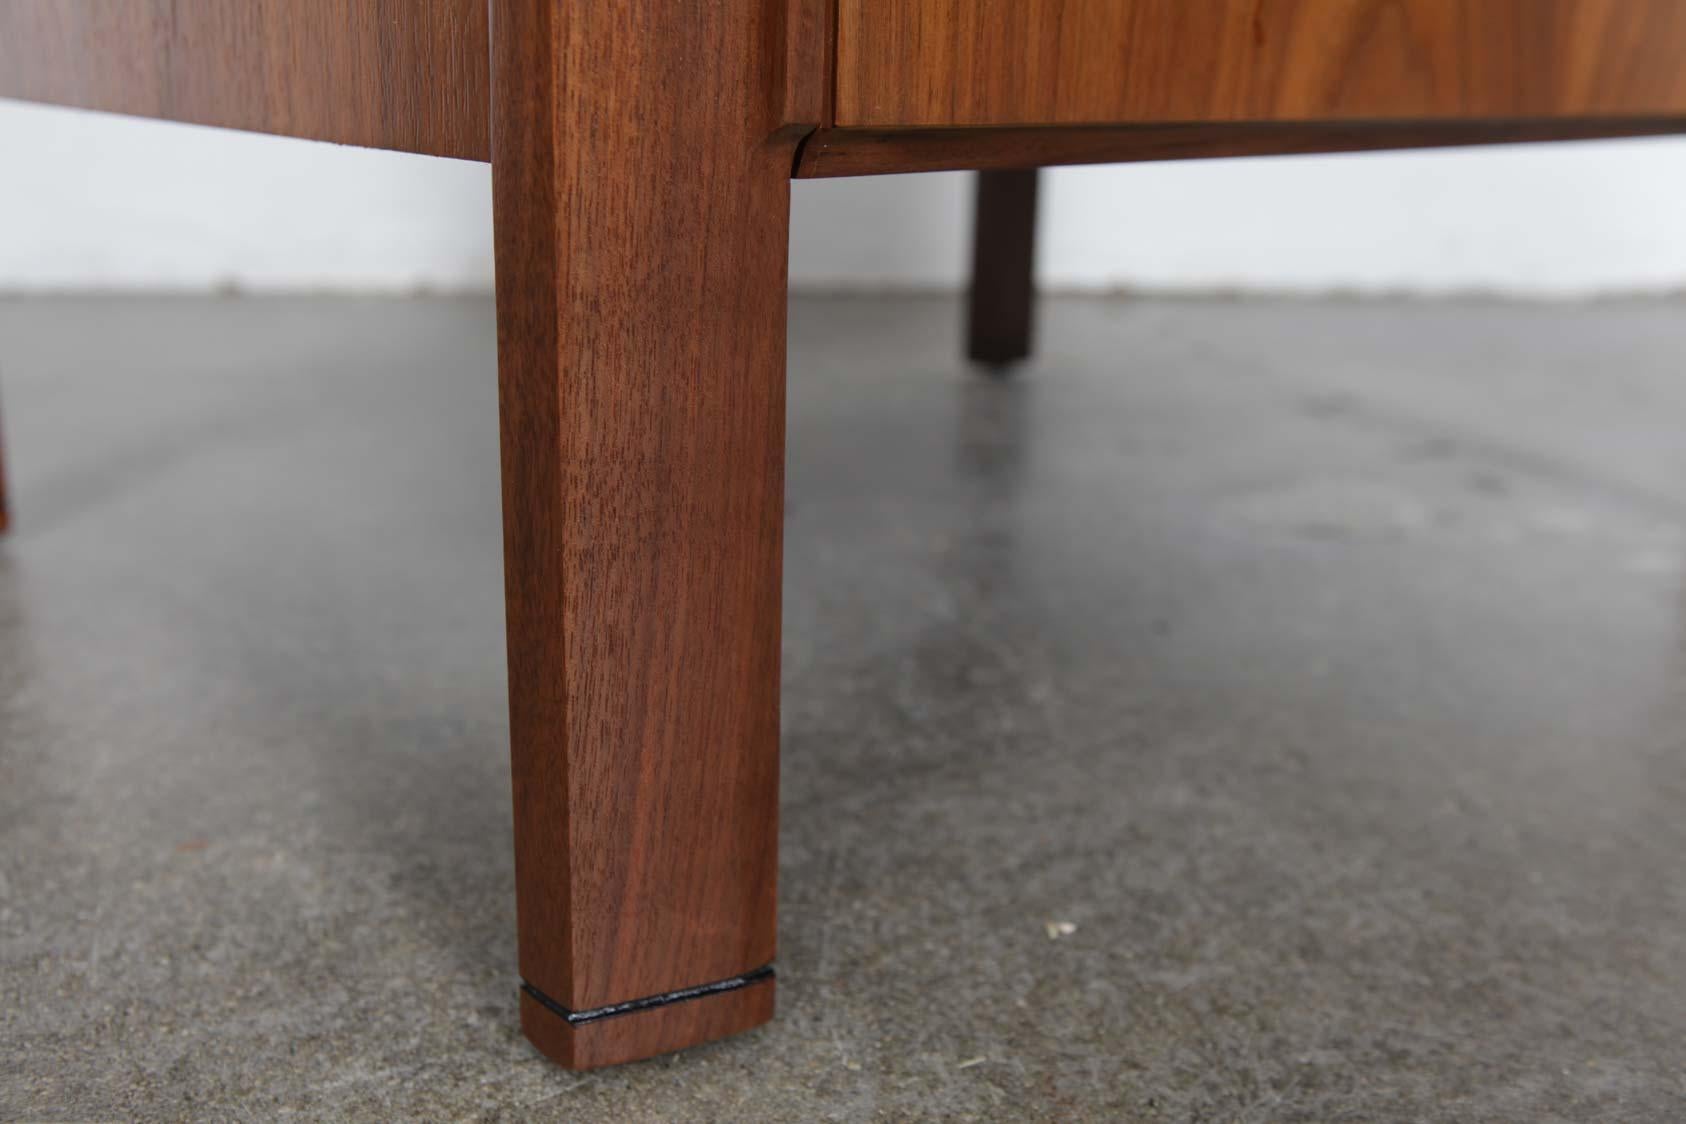 20th Century Pair of Walnut End Tables by Milo Baughman for Glenn of California